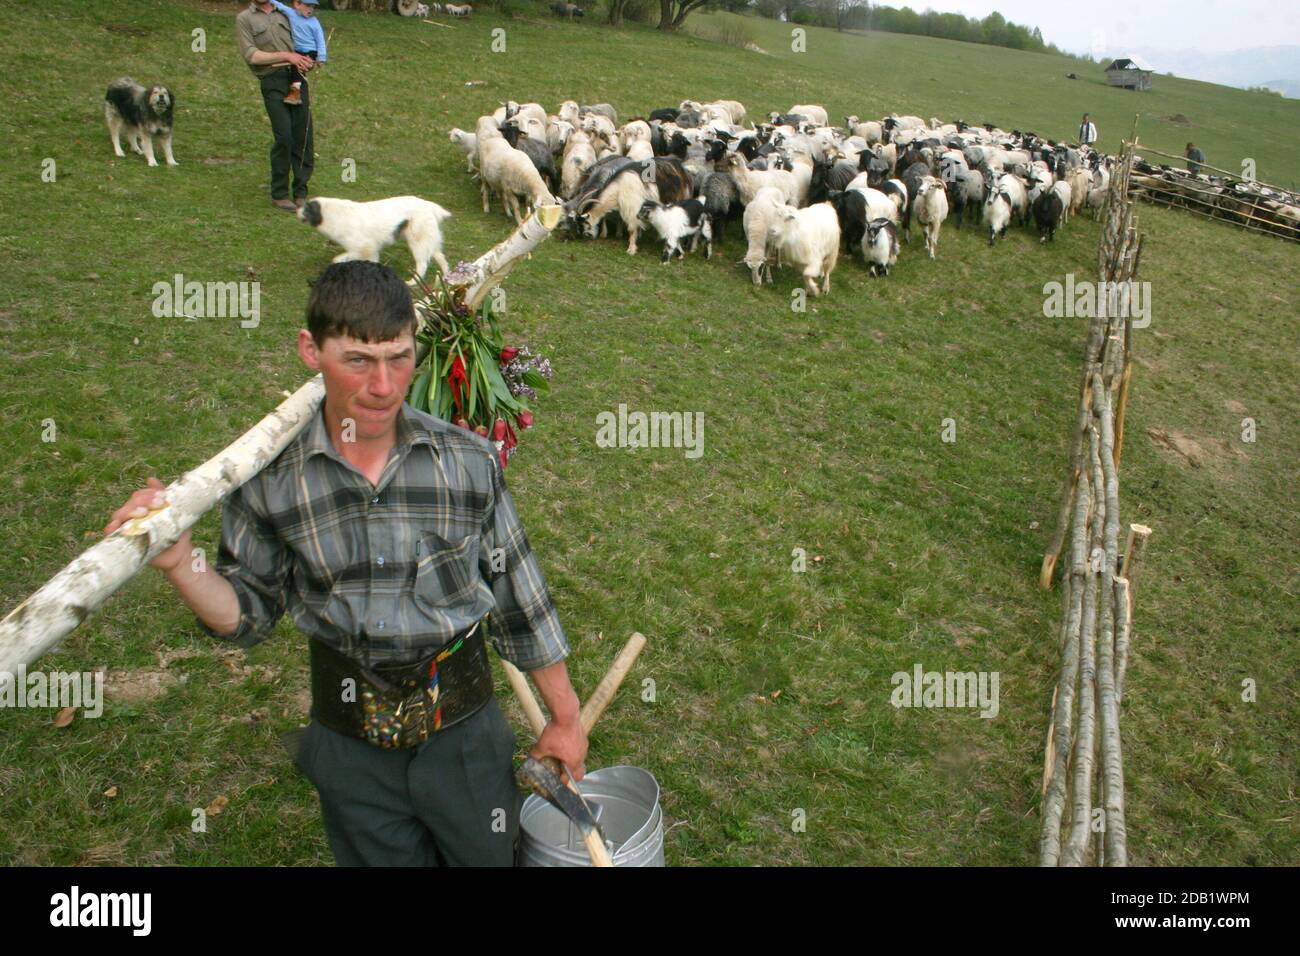 Spring custom in Maramures, Romania. Shepherd carrying a wooden cross for divine protection before heading to the mountain pastures. Stock Photo